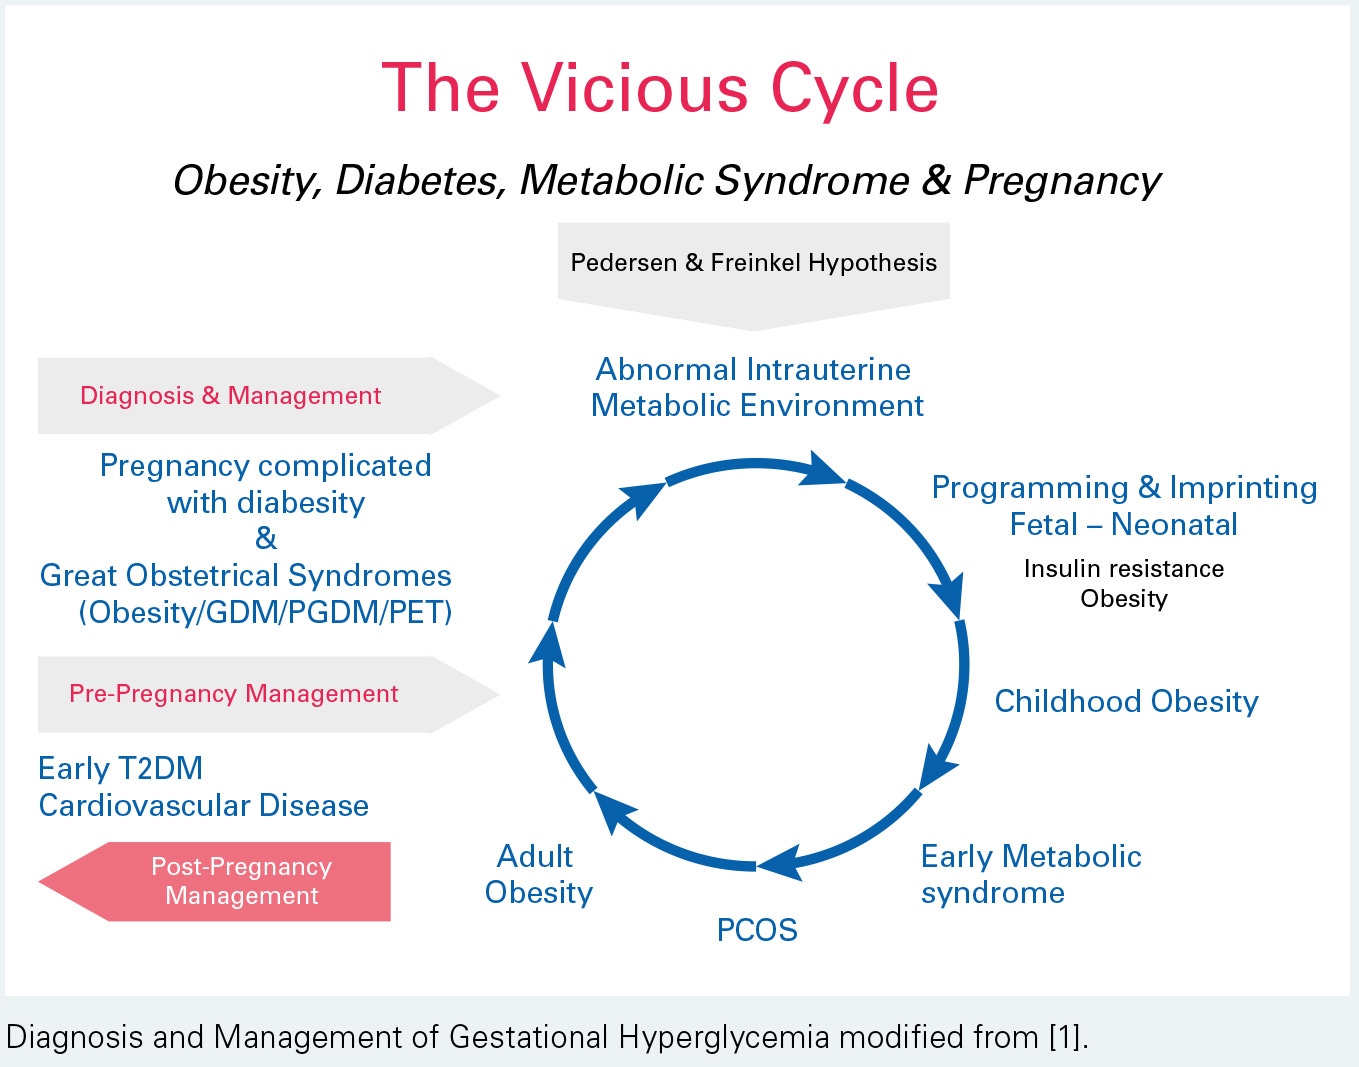 Diagnosis and Management of Gestational Hyperglycemia modified from [1].